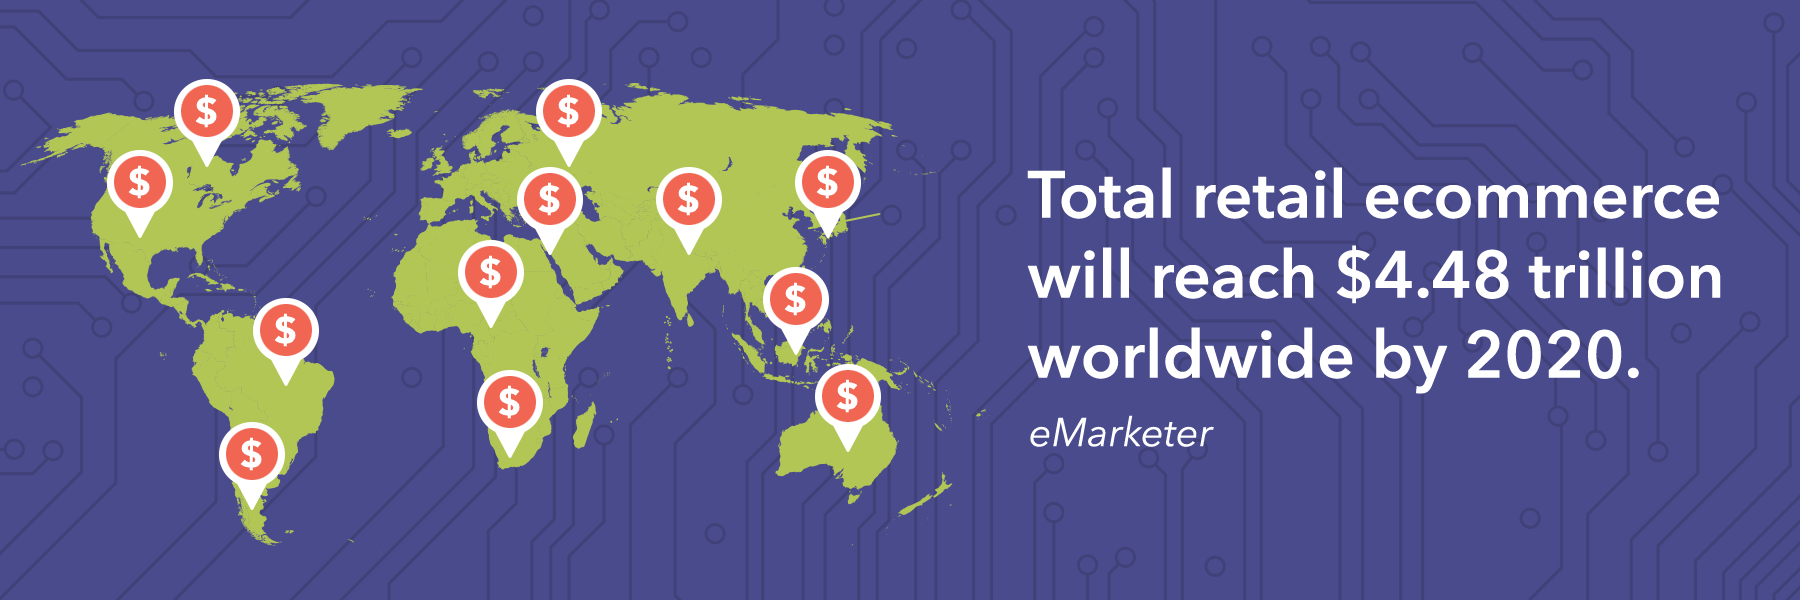 Total retail ecommerce will reach 4.48 trillion worldwide by 2020.